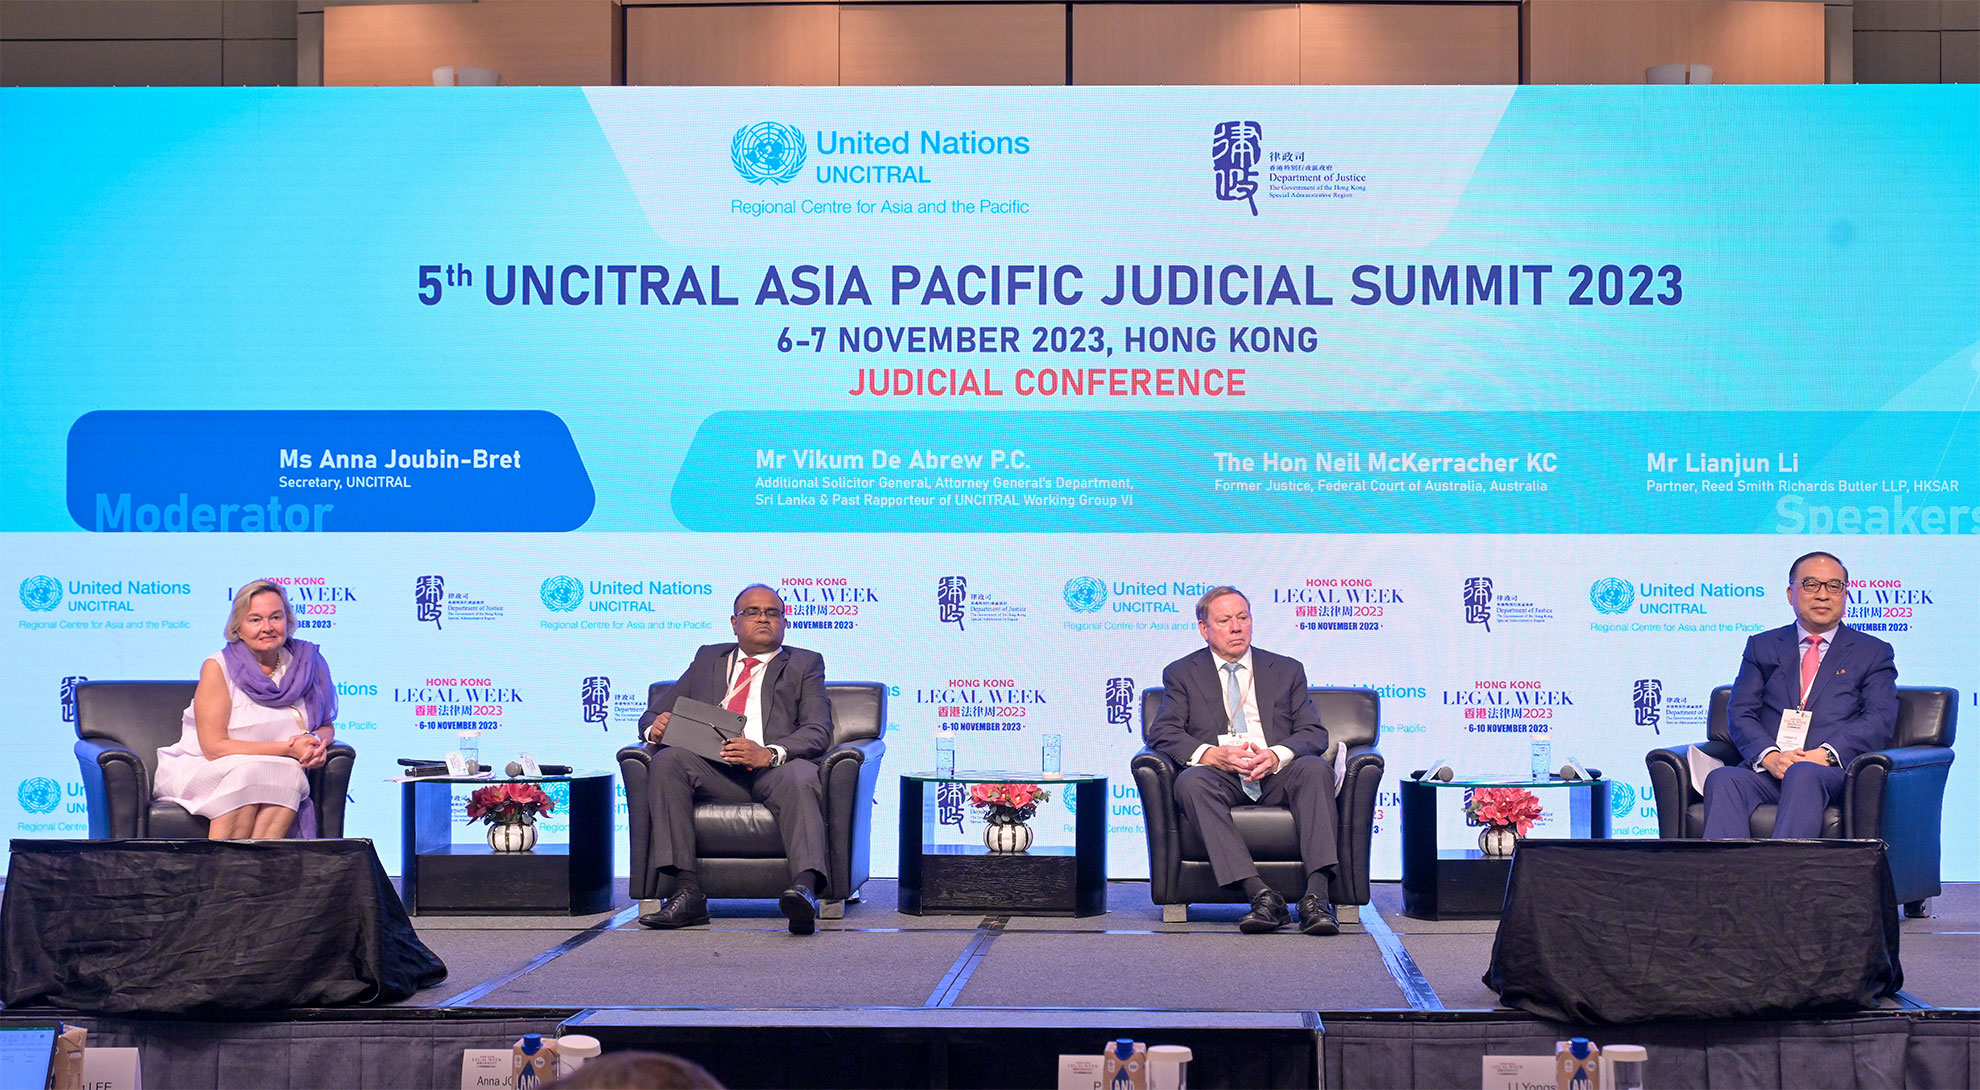 The five-day Hong Kong Legal Week 2023, an annual flagship event of the legal sector and the Department of Justice, themed "Onward & Forward: Connecting the World" began today (November 6). Photo shows (from left) the Secretary of United Nations Commission on International Trade Law (UNCITRAL), Ms Anna Joubin-Bret; Additional Solicitor General of the Attorney General's Department of Sri Lanka and Past Rapporteur of UNCITRAL Working Group VI, Mr Vikum De Abrew P.C.; Former Justice of the Federal Court of Australia, The Hon Neil McKerracher KC; and Partner of the Reed Smith Richards Butler LLP Mr Li Lianjun at panel session 1 on United Nations Convention on the International Effects of Judicial Sales of Ships (the Beijing Convention) at the 5th UNCITRAL Asia Pacific Judicial Summit - Judicial Conference.